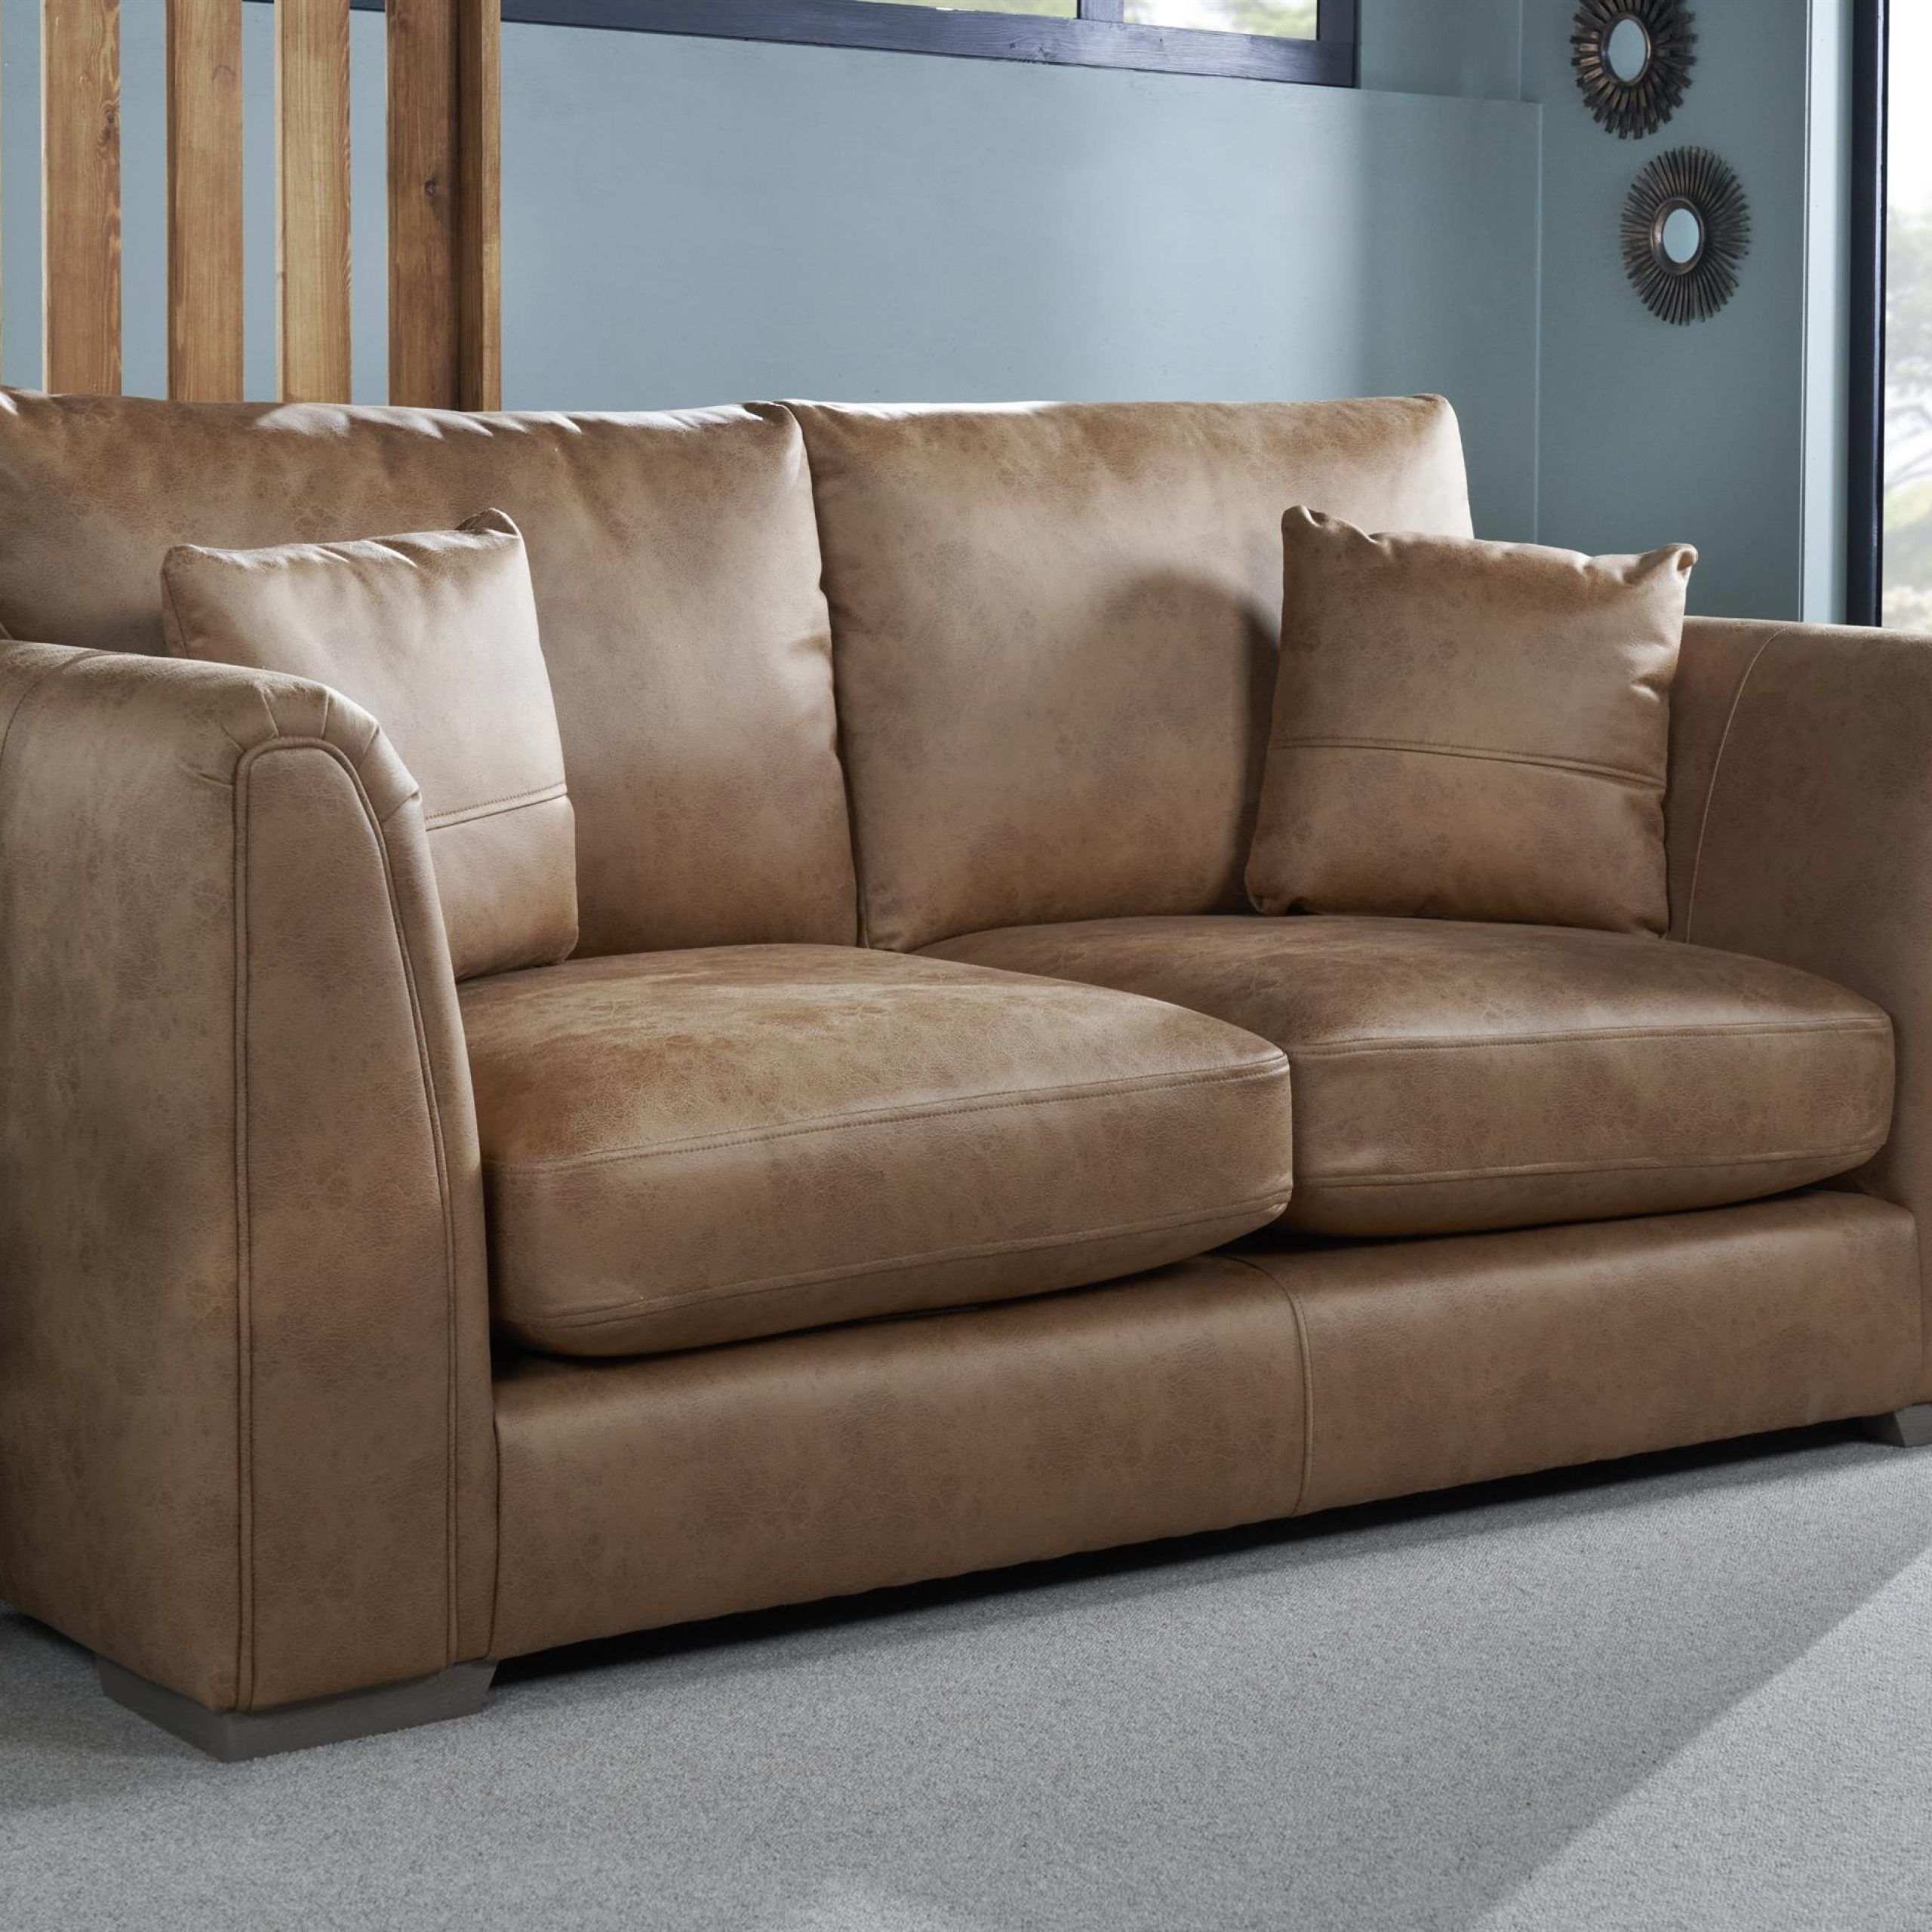 Endurance Xavier Faux Leather 2 Seater Sofa Inside Faux Leather Sofas (Photo 4 of 15)